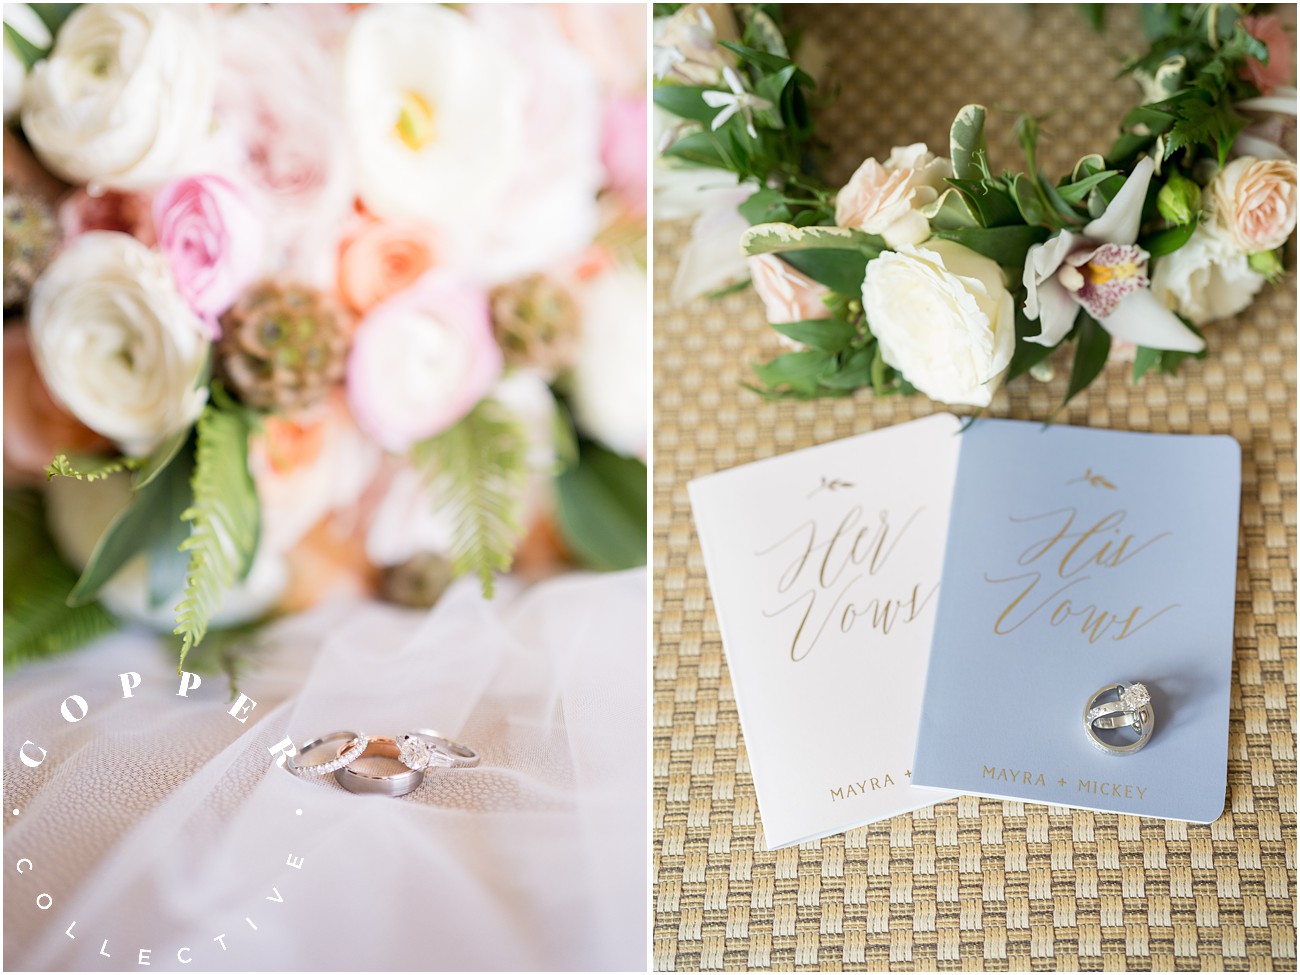 wedding day rings and vow books